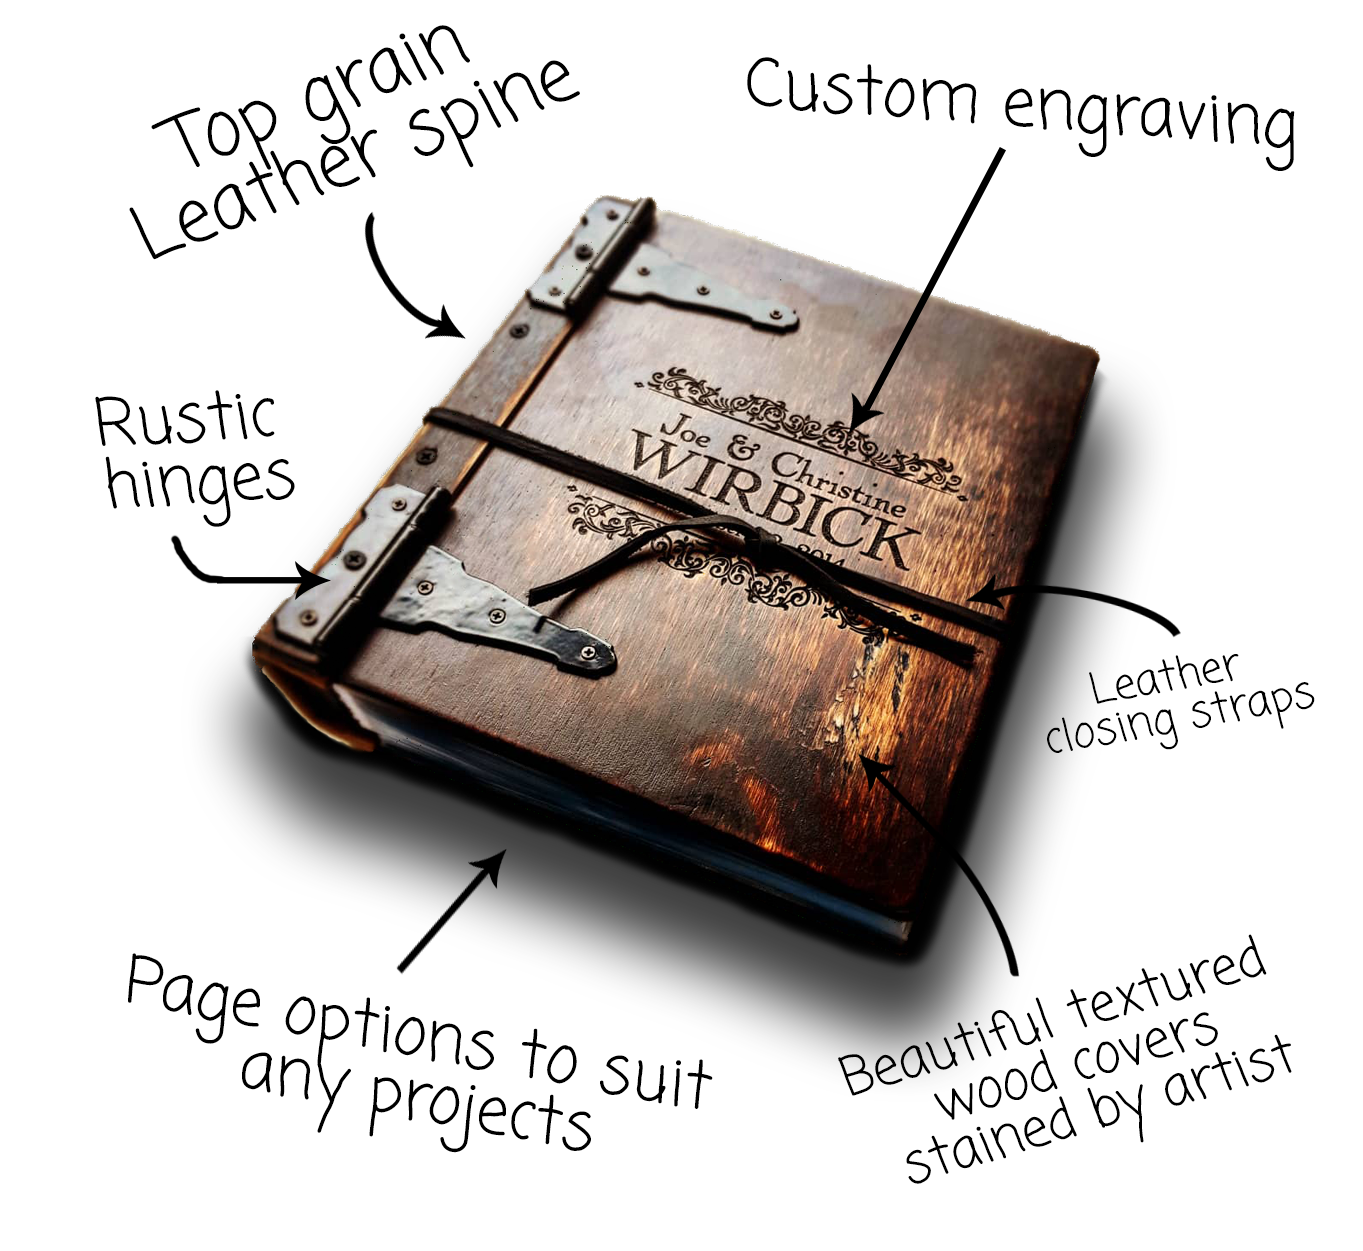 Custom wooden book by Rustic Engravings with customization options to personalize for keepsake or gift